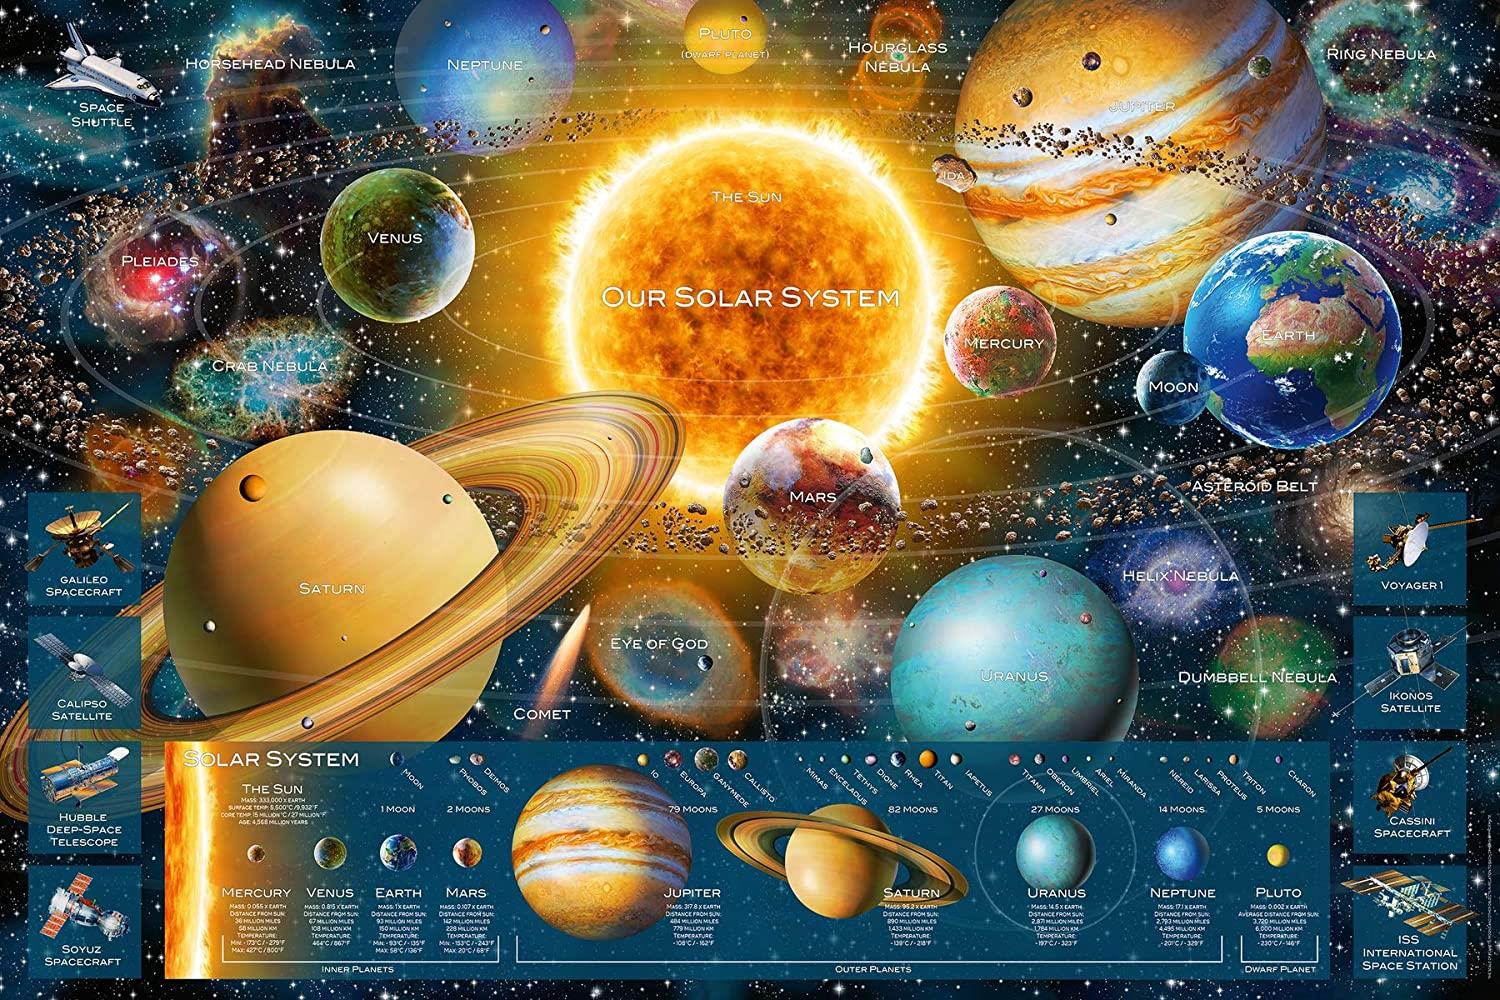 Ravensburger Space Odyssey Jigsaw Puzzle (5000 Pieces)